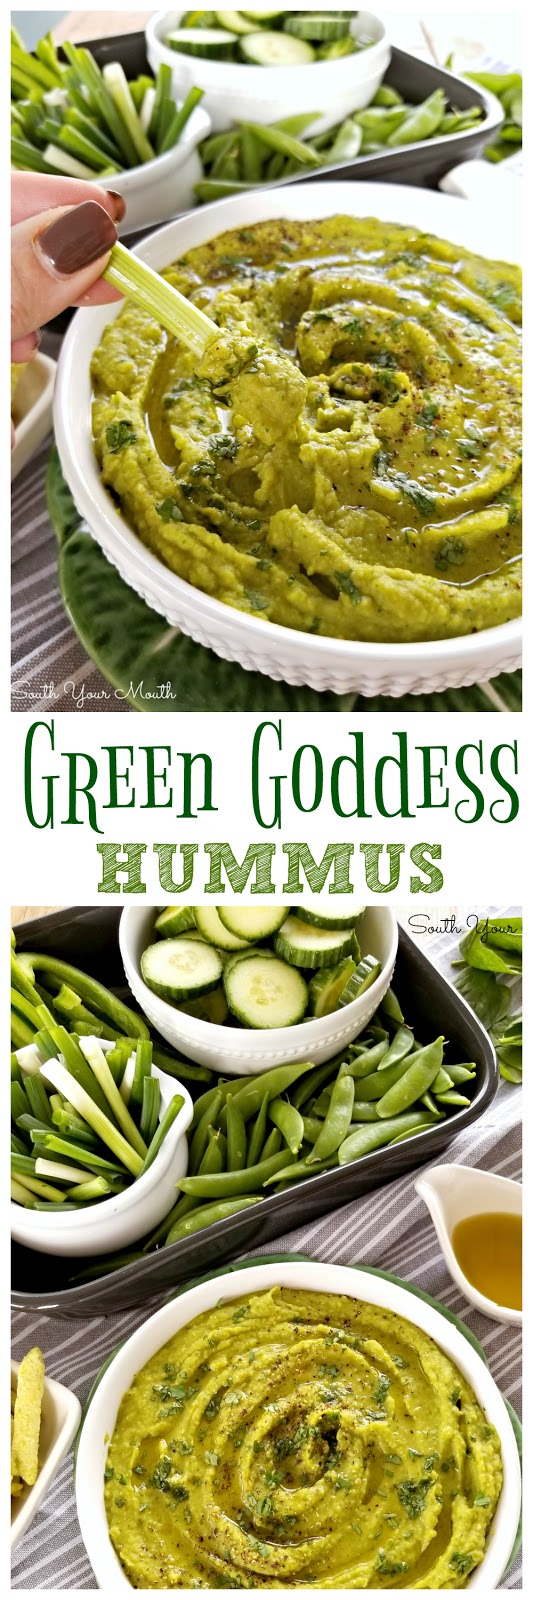 Super nutritious, vitamin-packed hummus made with green peas and spinach